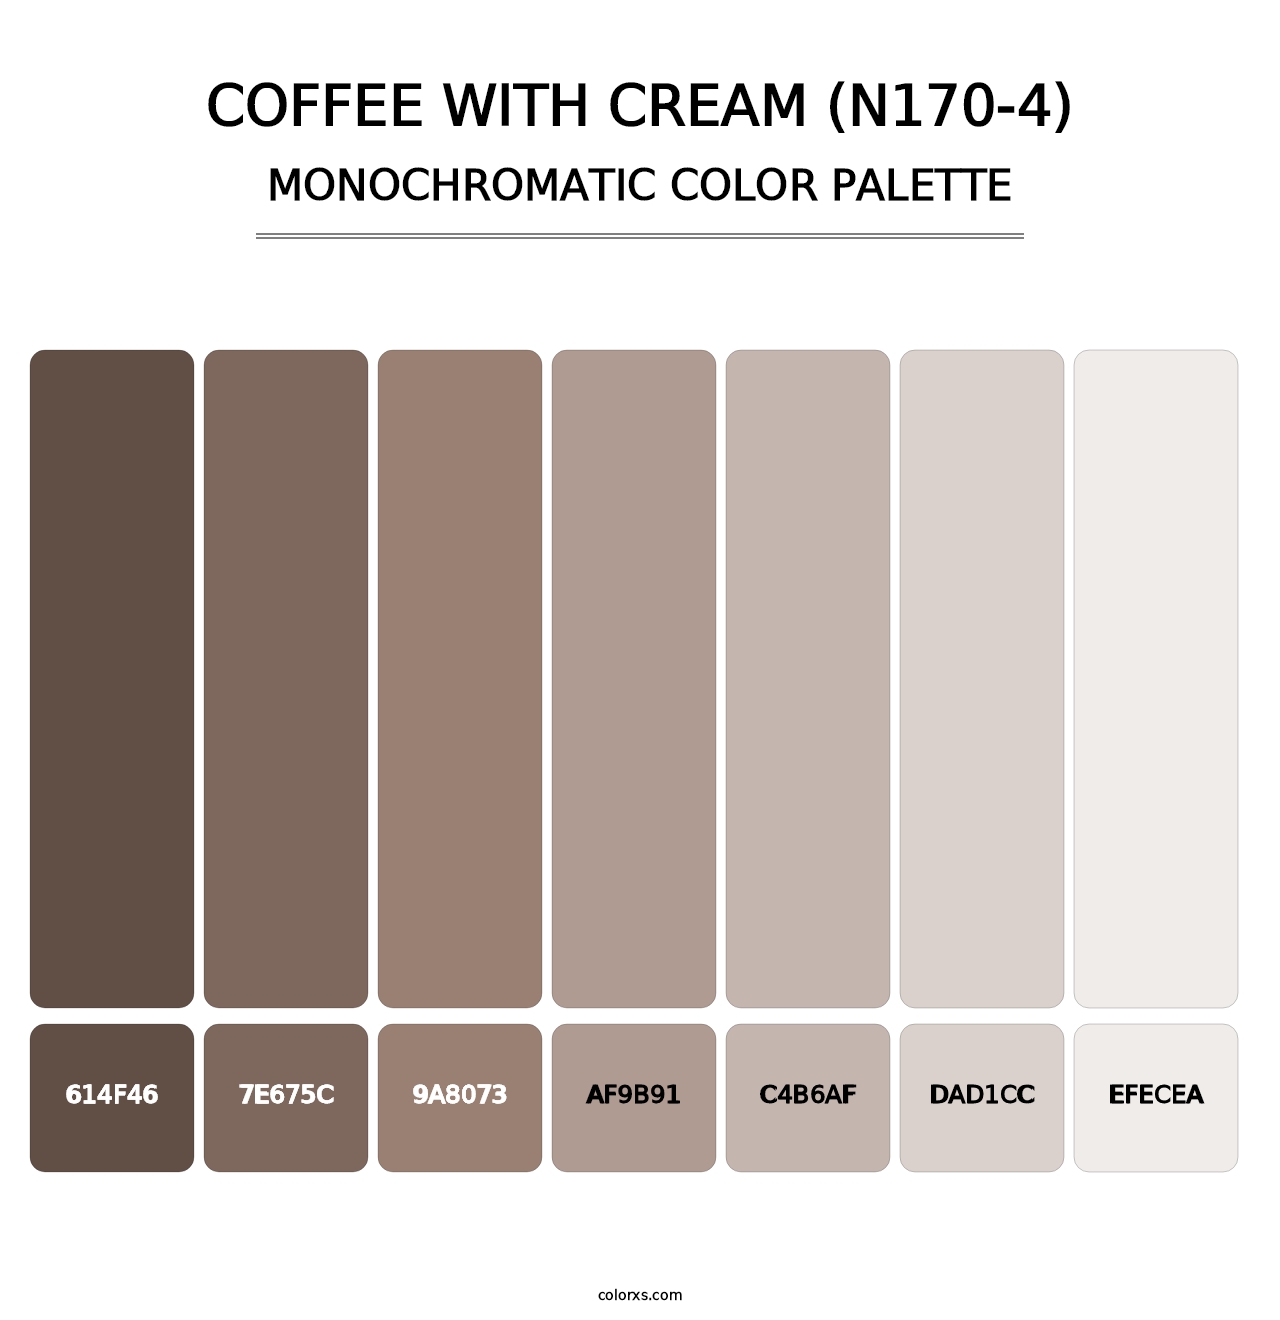 Coffee With Cream (N170-4) - Monochromatic Color Palette